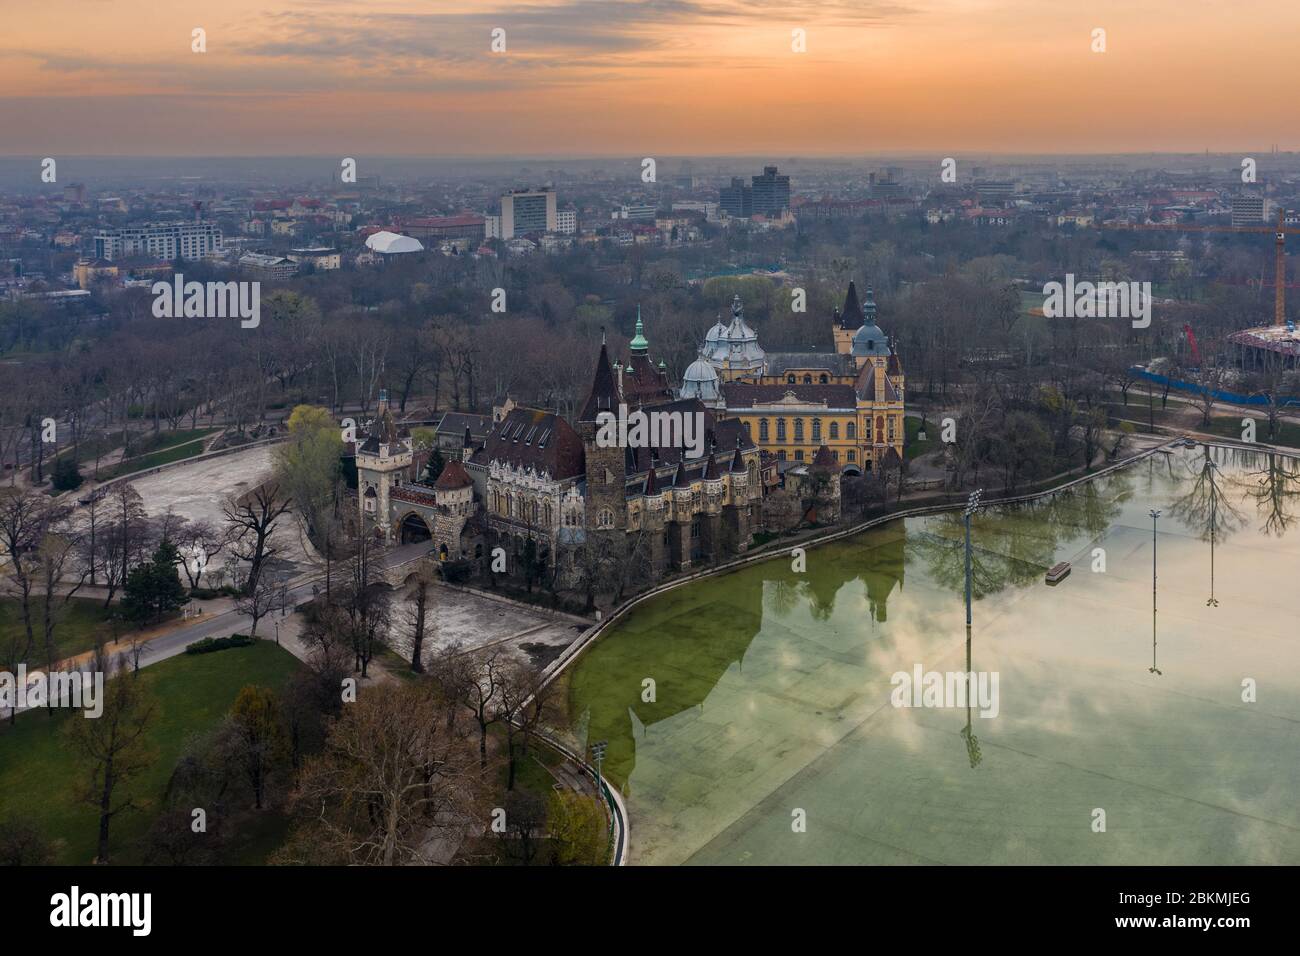 Budapest, Hungary - Aerial view of the Vajdahunyad Castle in City Park (Varosliget) with City Park Lake and a beautiful golden sunrise behind Stock Photo